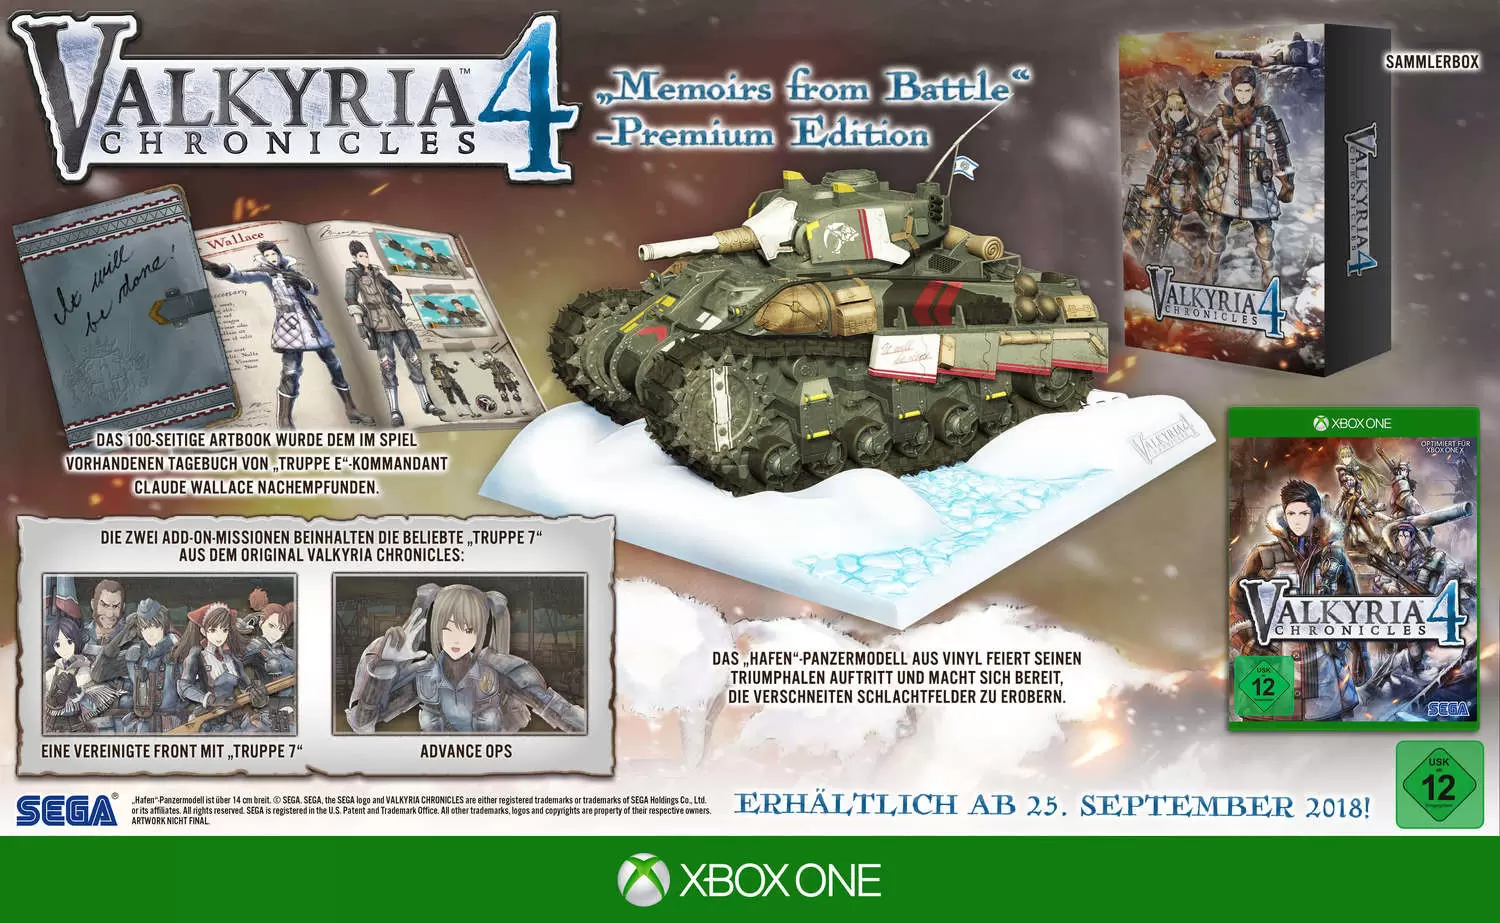 Jeux XBOX One - Valkyria Chronicles 4 - Memoirs From Battle Premium Edition